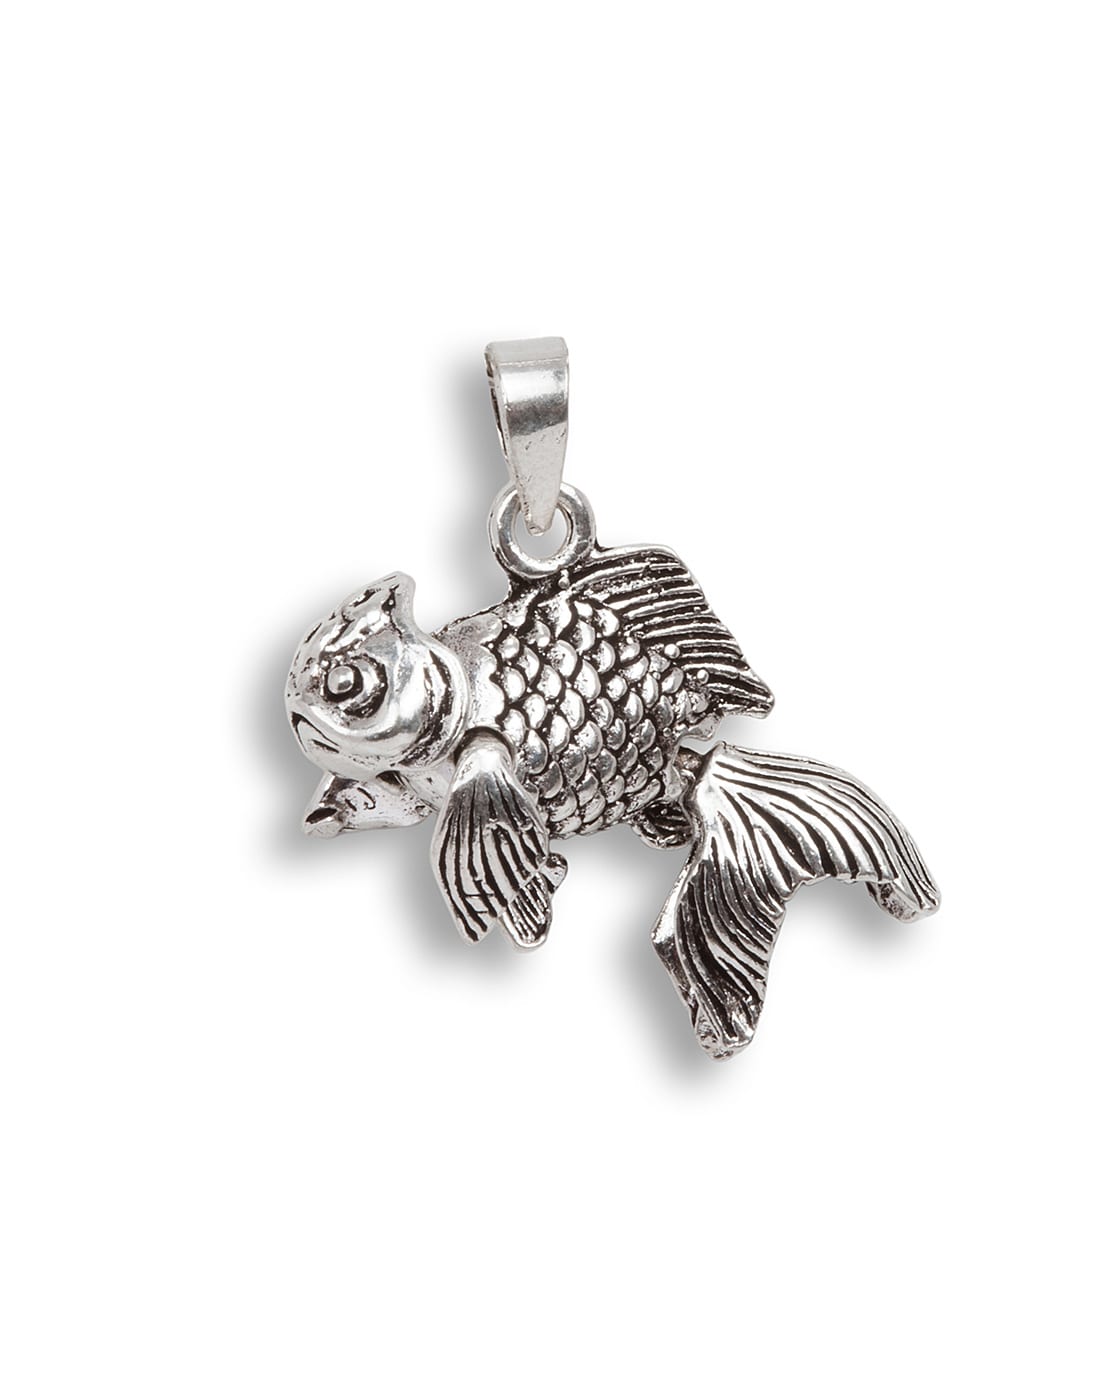 925 Sterling Silver Fish Pendant